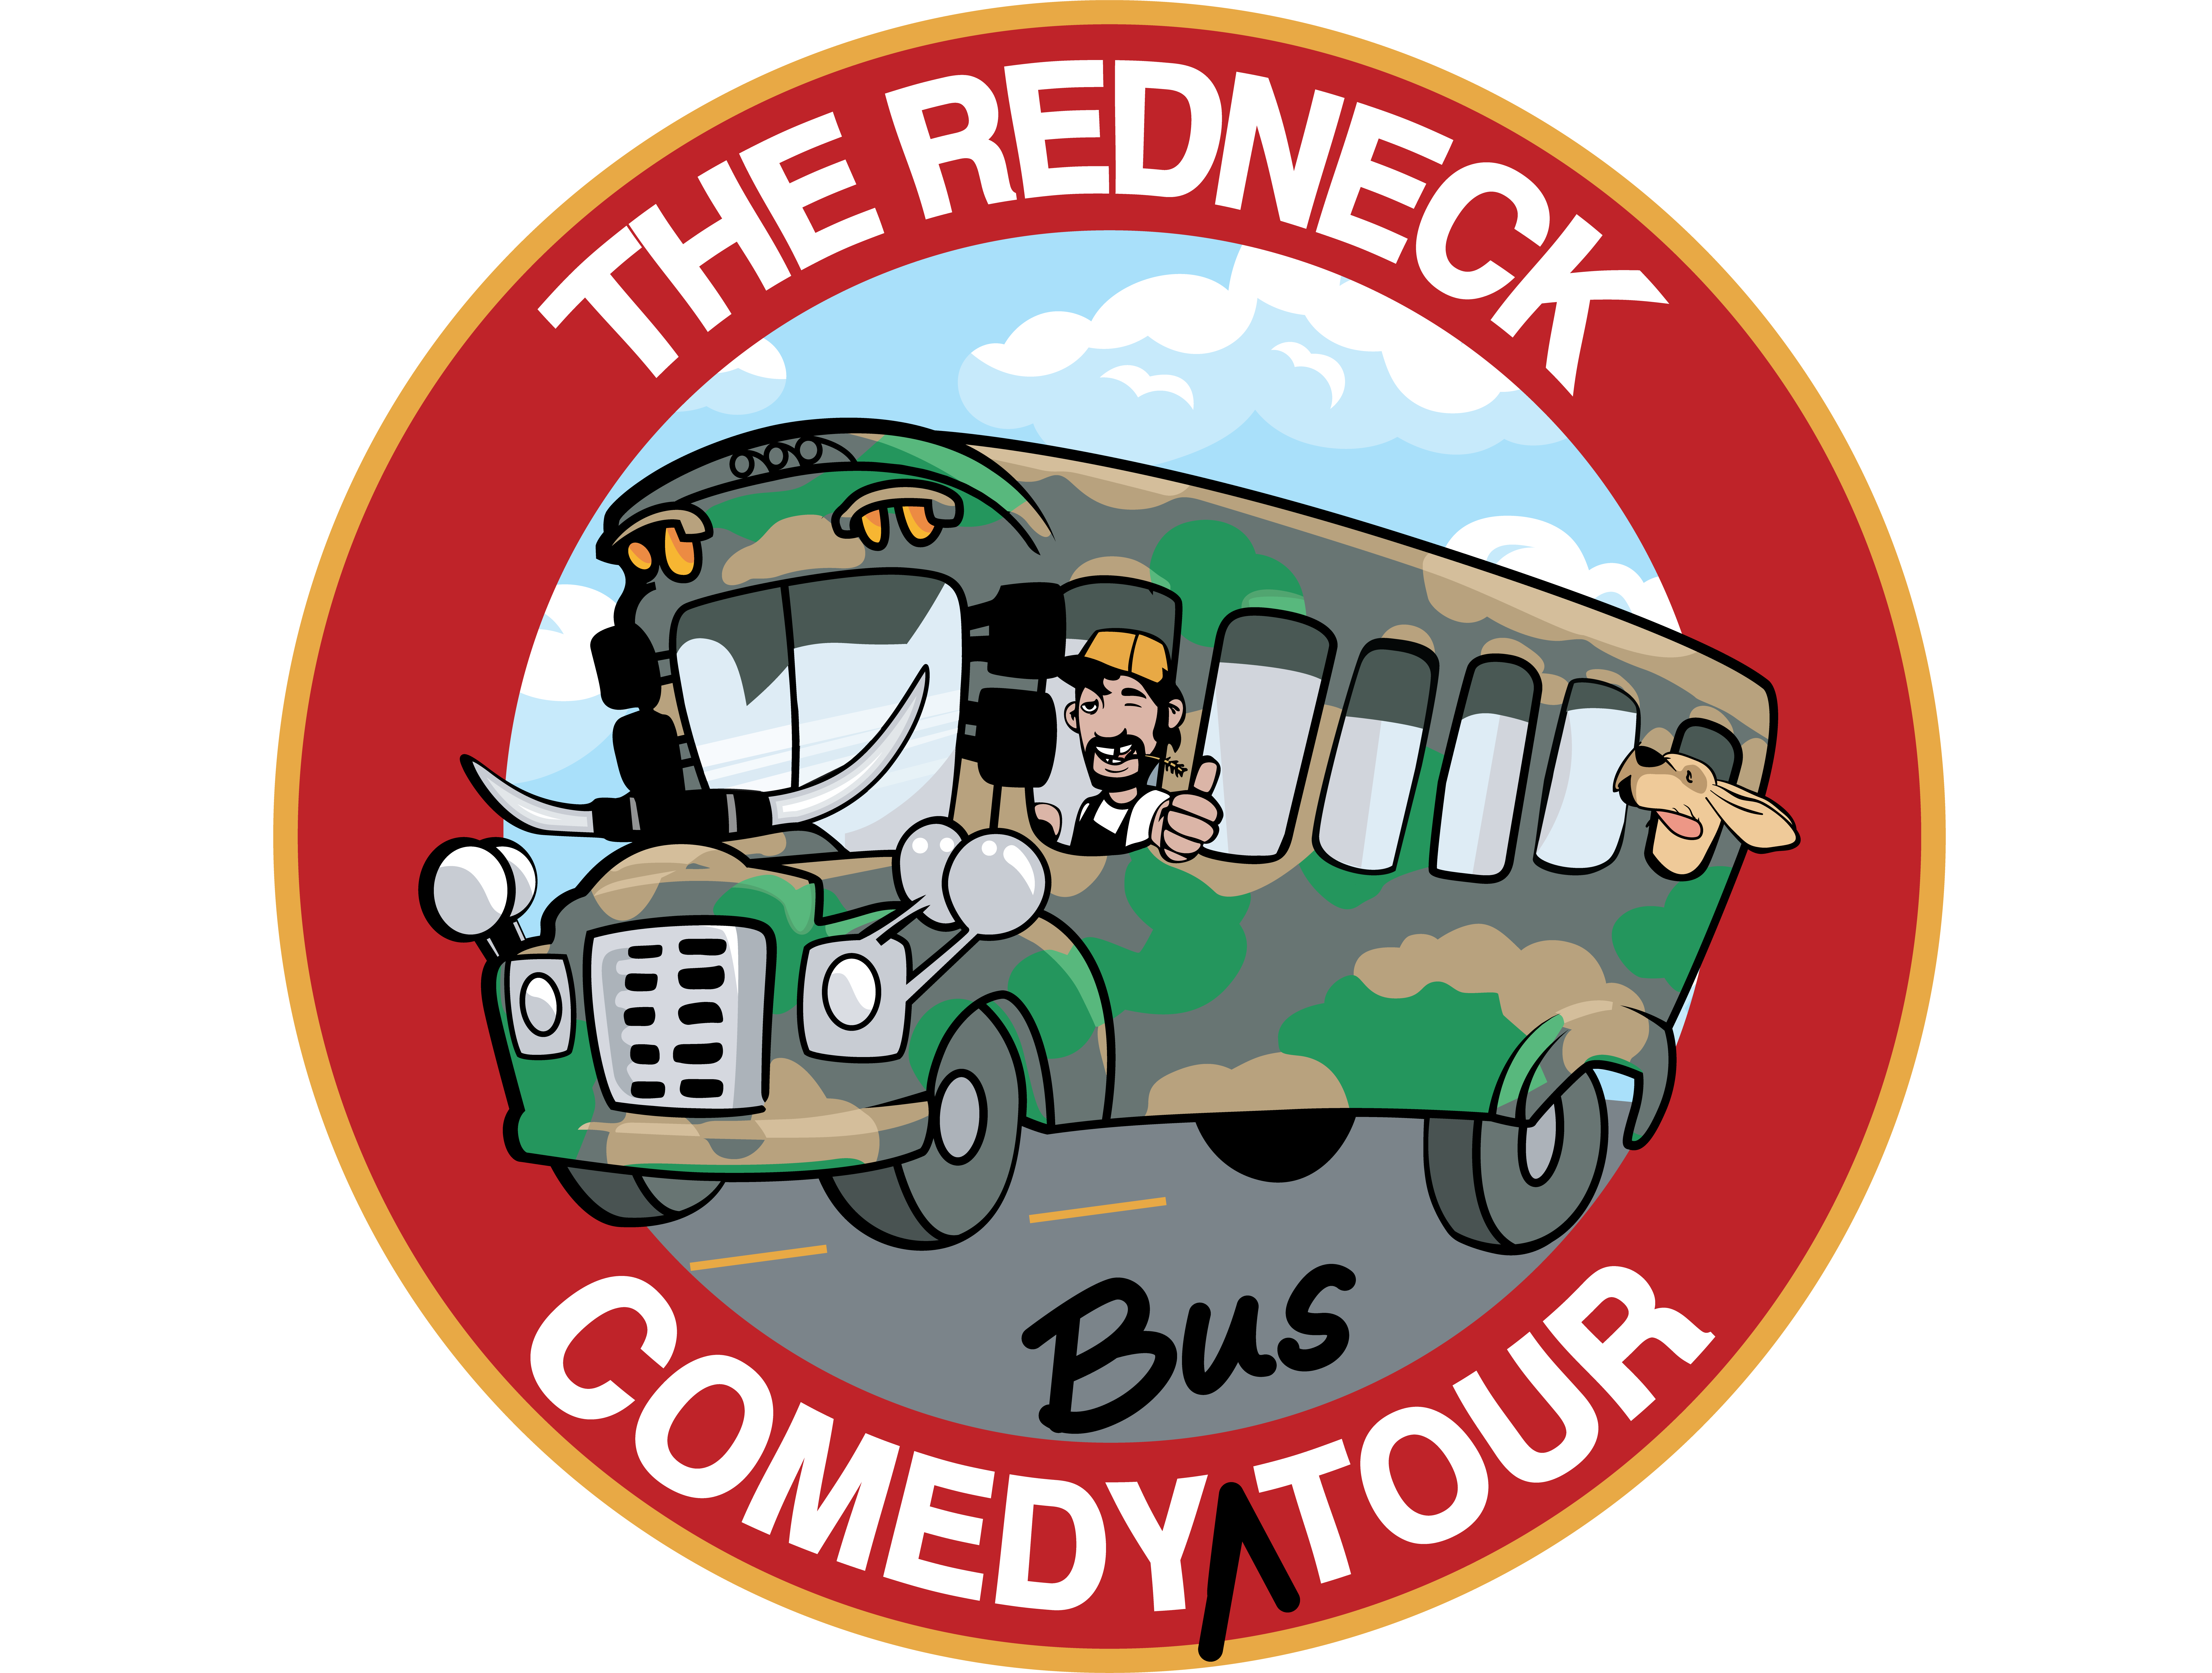 Redneck Comedy Bus Tennessee and Missouri #1 Sightseeing Tours photo